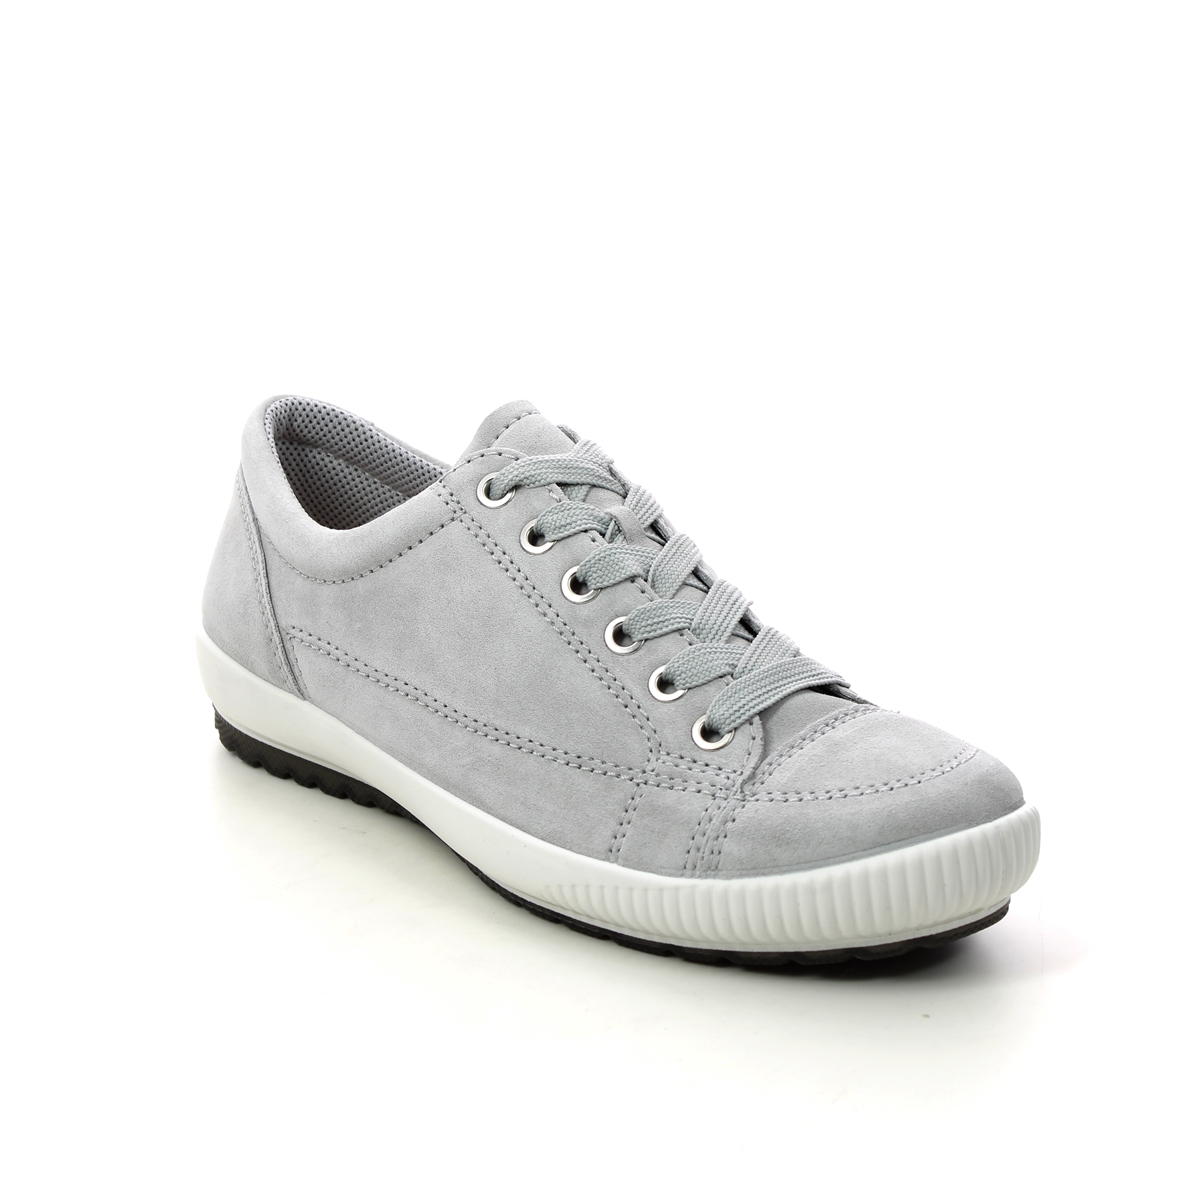 Legero Tanaro Stitch Light Grey Suede Womens Lacing Shoes 00820-25 In Size 9 In Plain Light Grey Suede